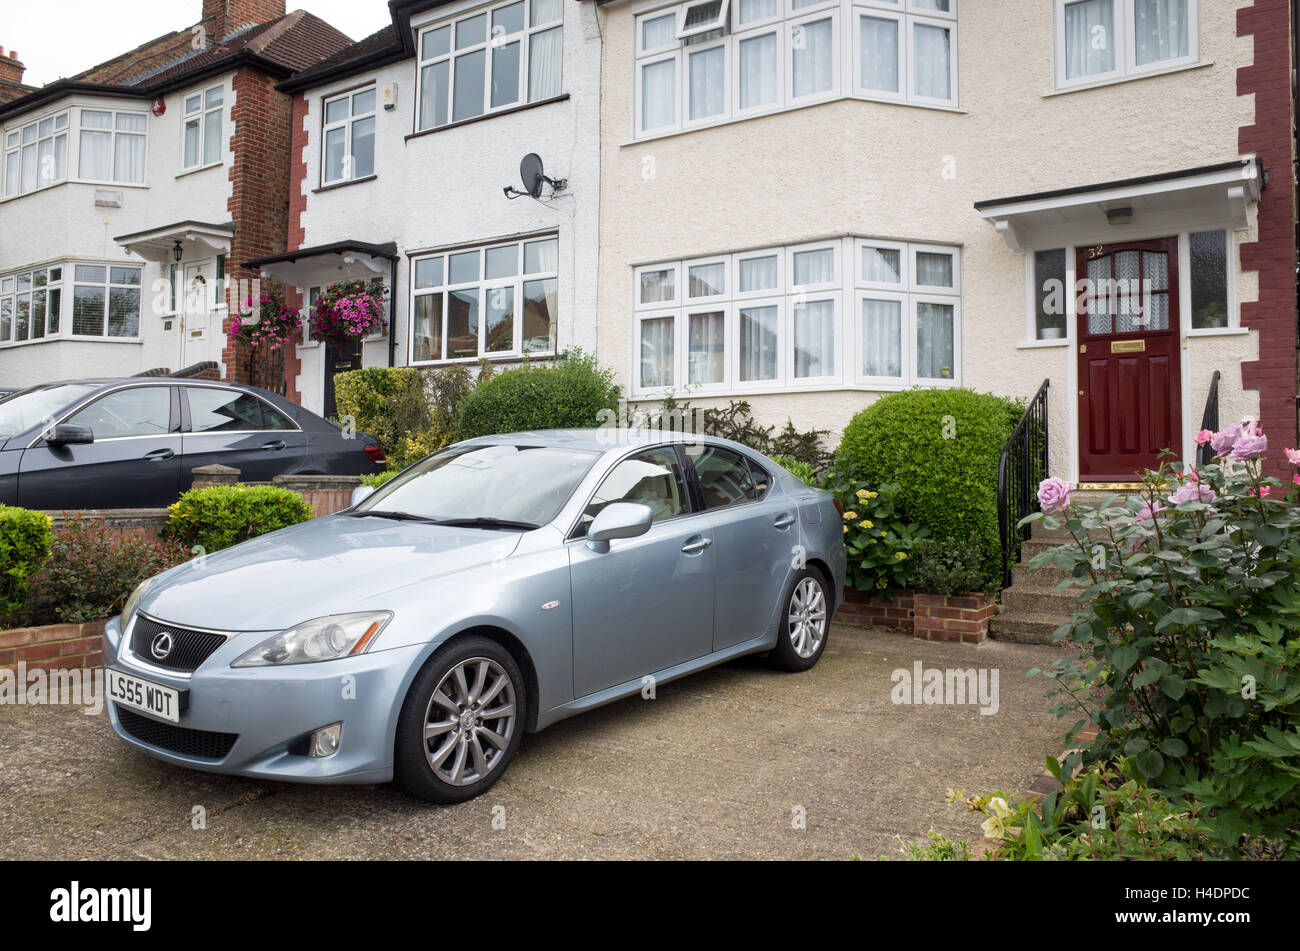 Cars parked on the front drive of houses in Barnet, North London, England, UK Stock Photo